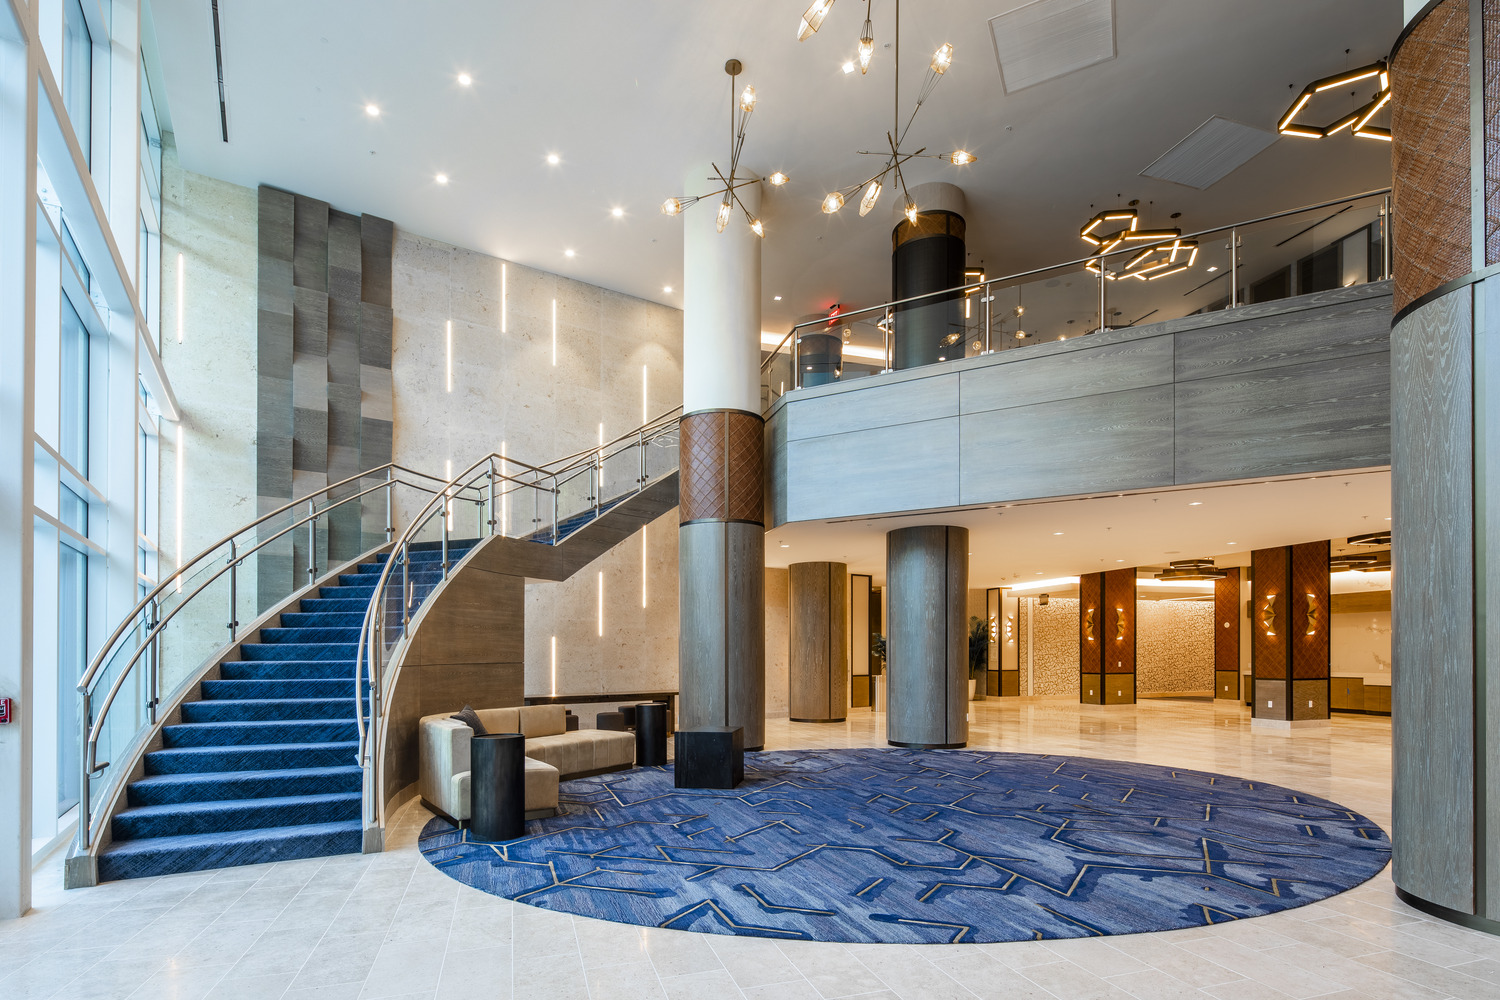 A lobby with a spiral staircase and blue carpet.